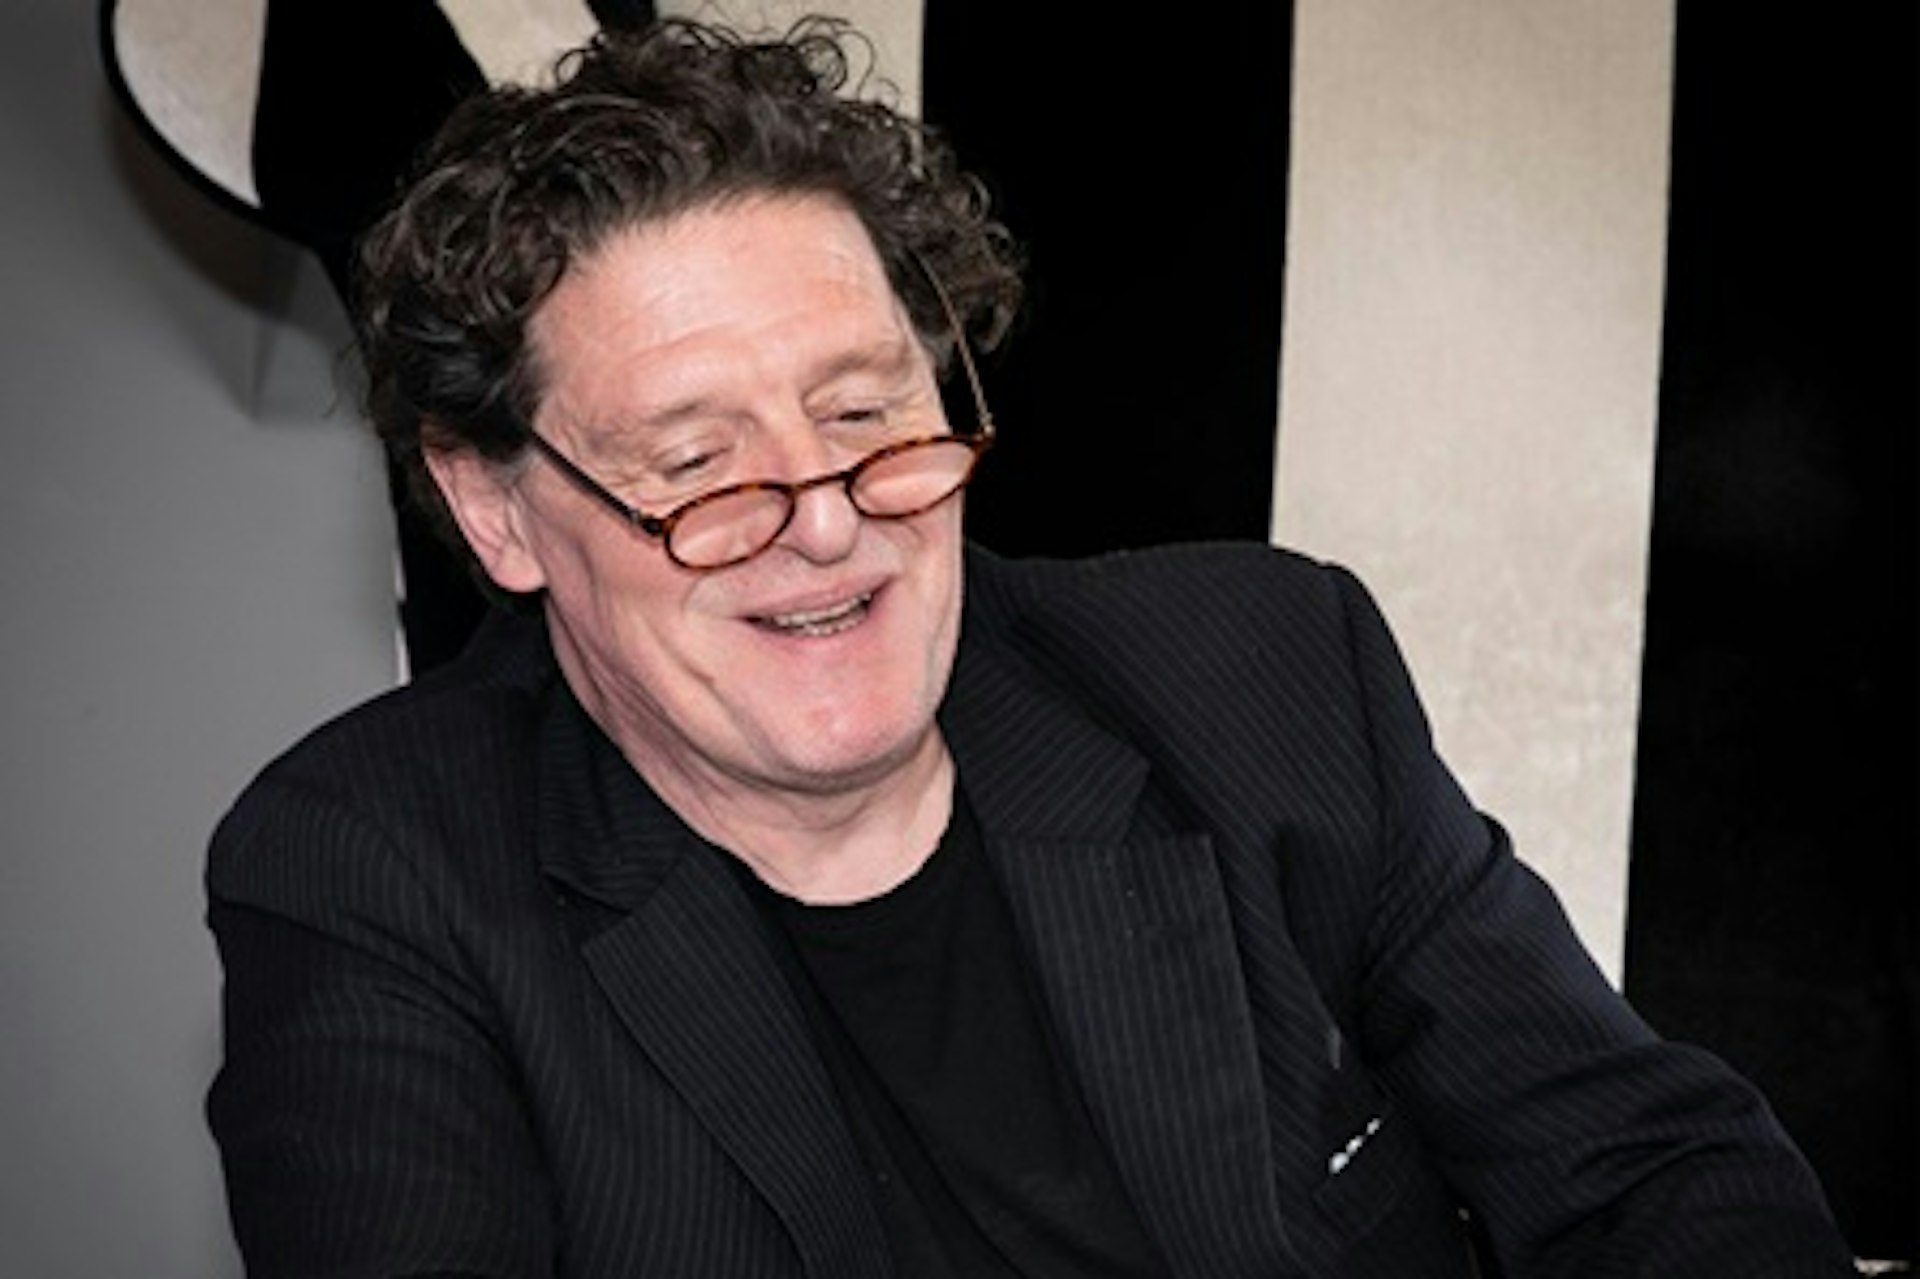 Wine and Dine with Acclaimed Chef Marco Pierre White for Two at the London Steakhouse Co - 22nd March 2022 1